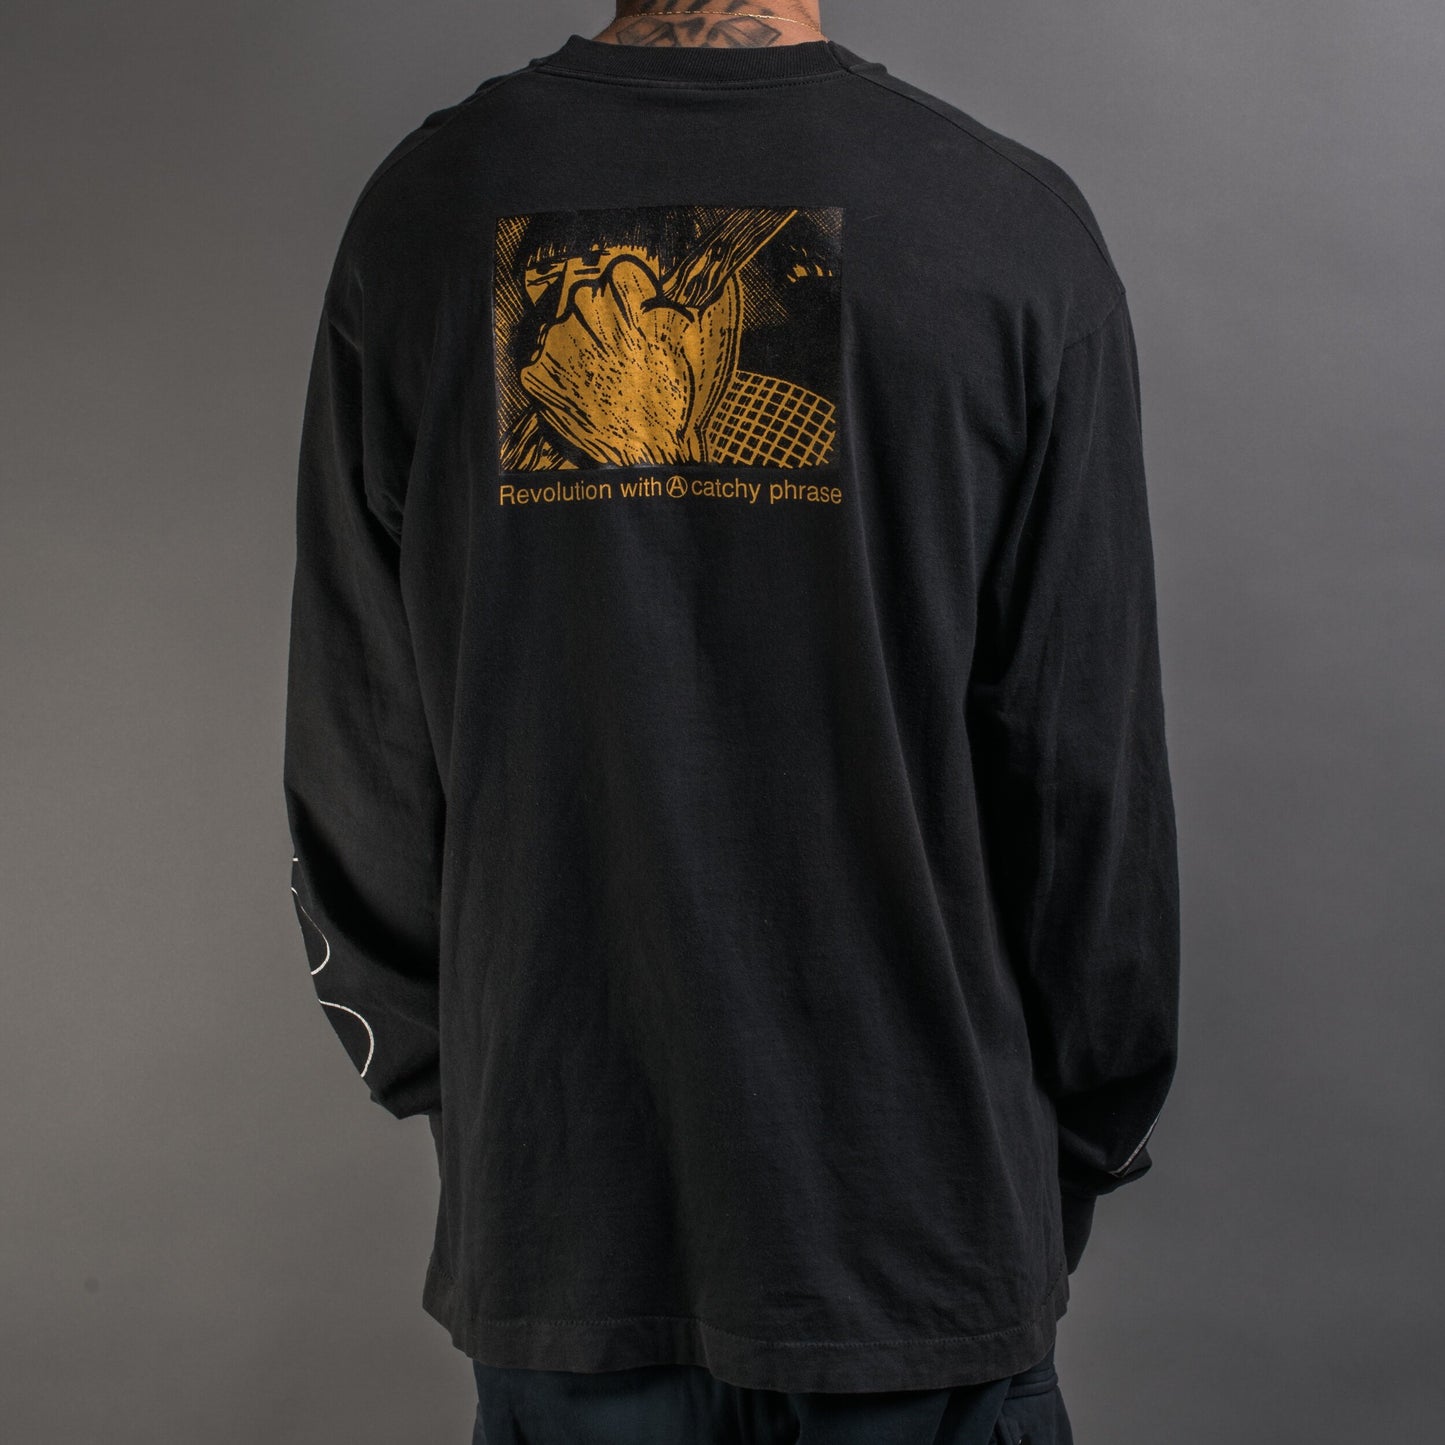 Vintage 90’s Refused Revolution With A Catchy Phrase Longsleeve